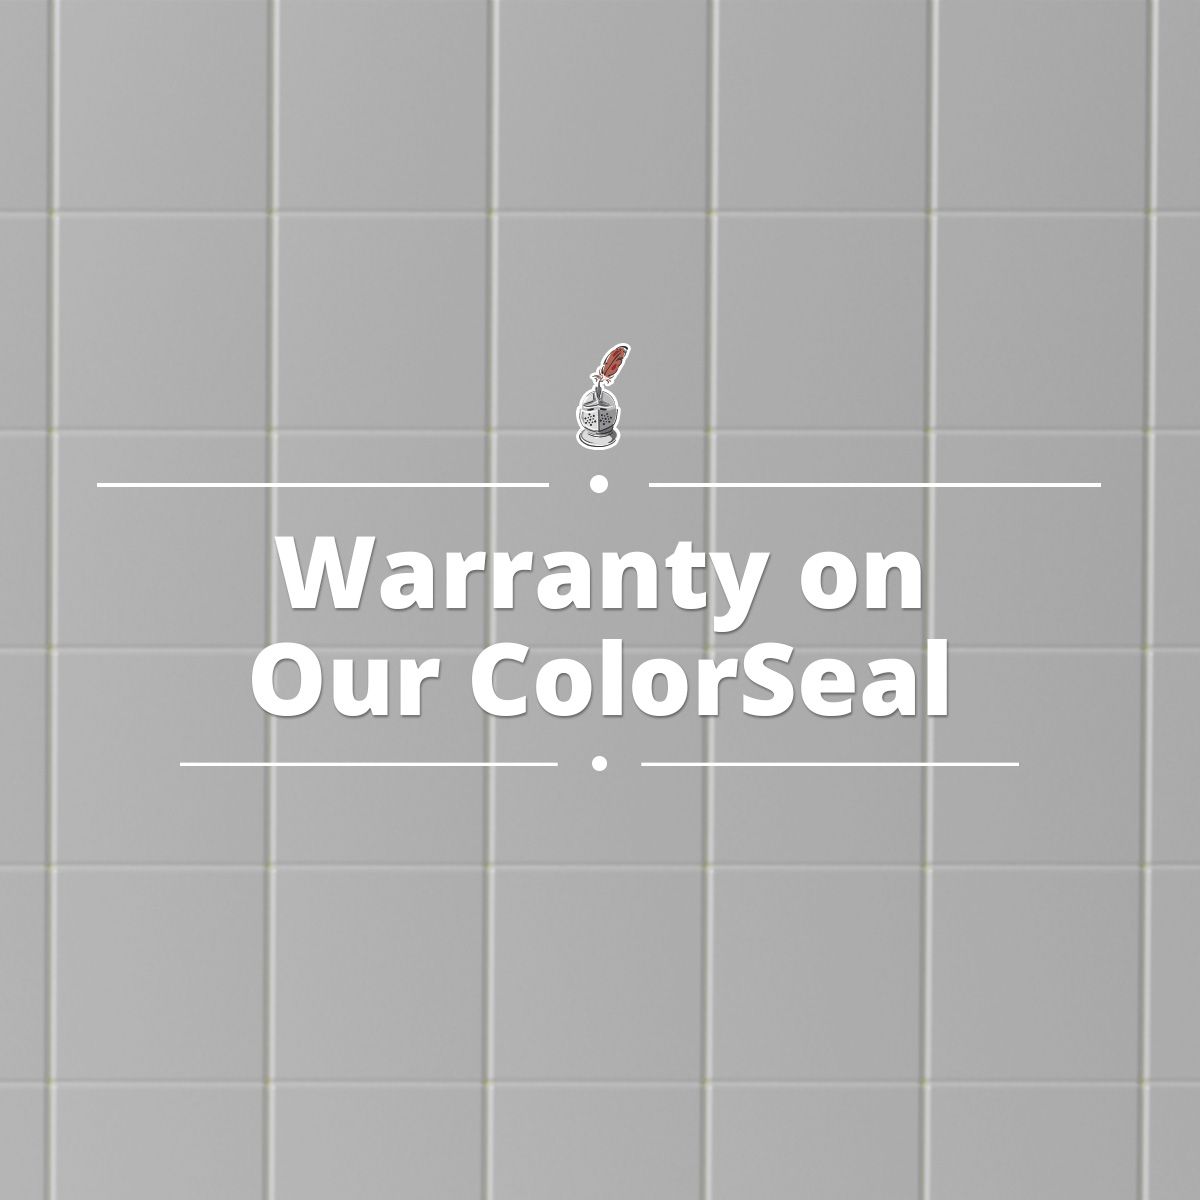 Warranty on Our ColorSeal